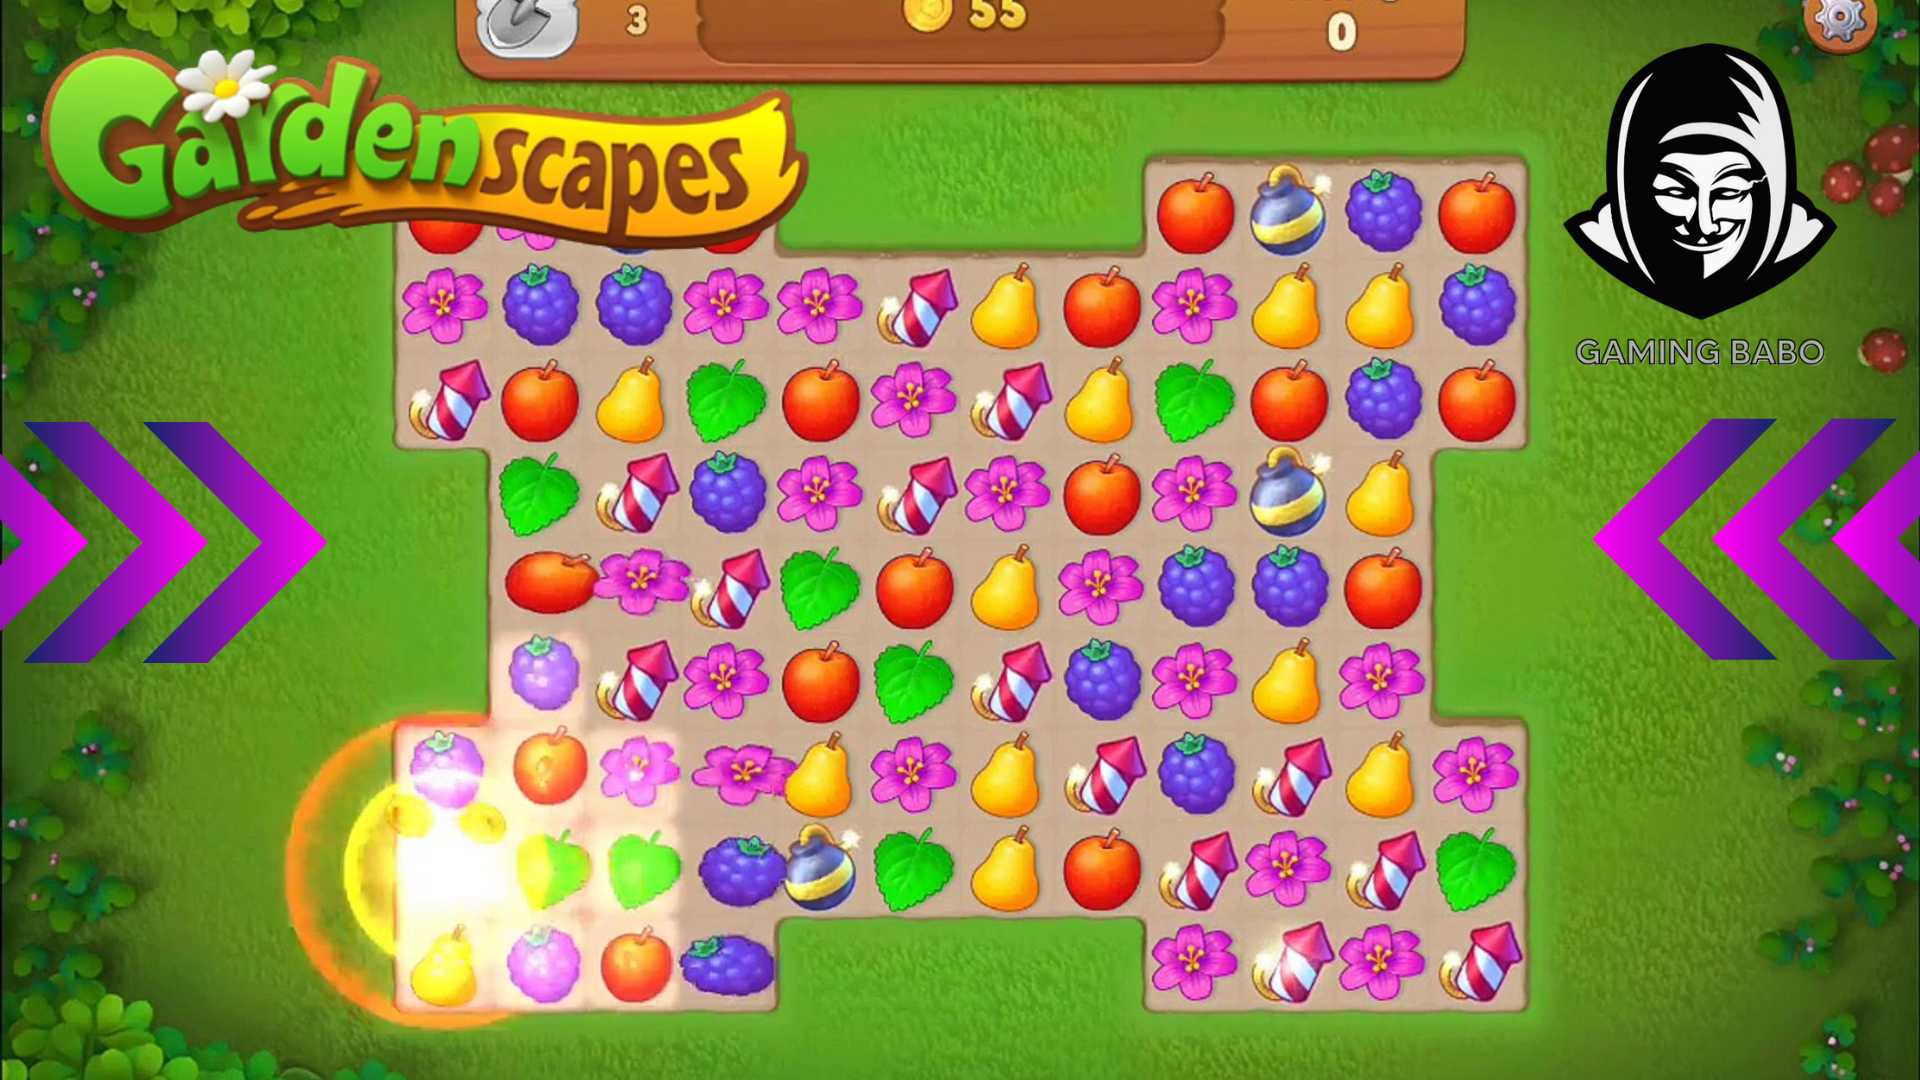 Gardenscapes tips and tricks